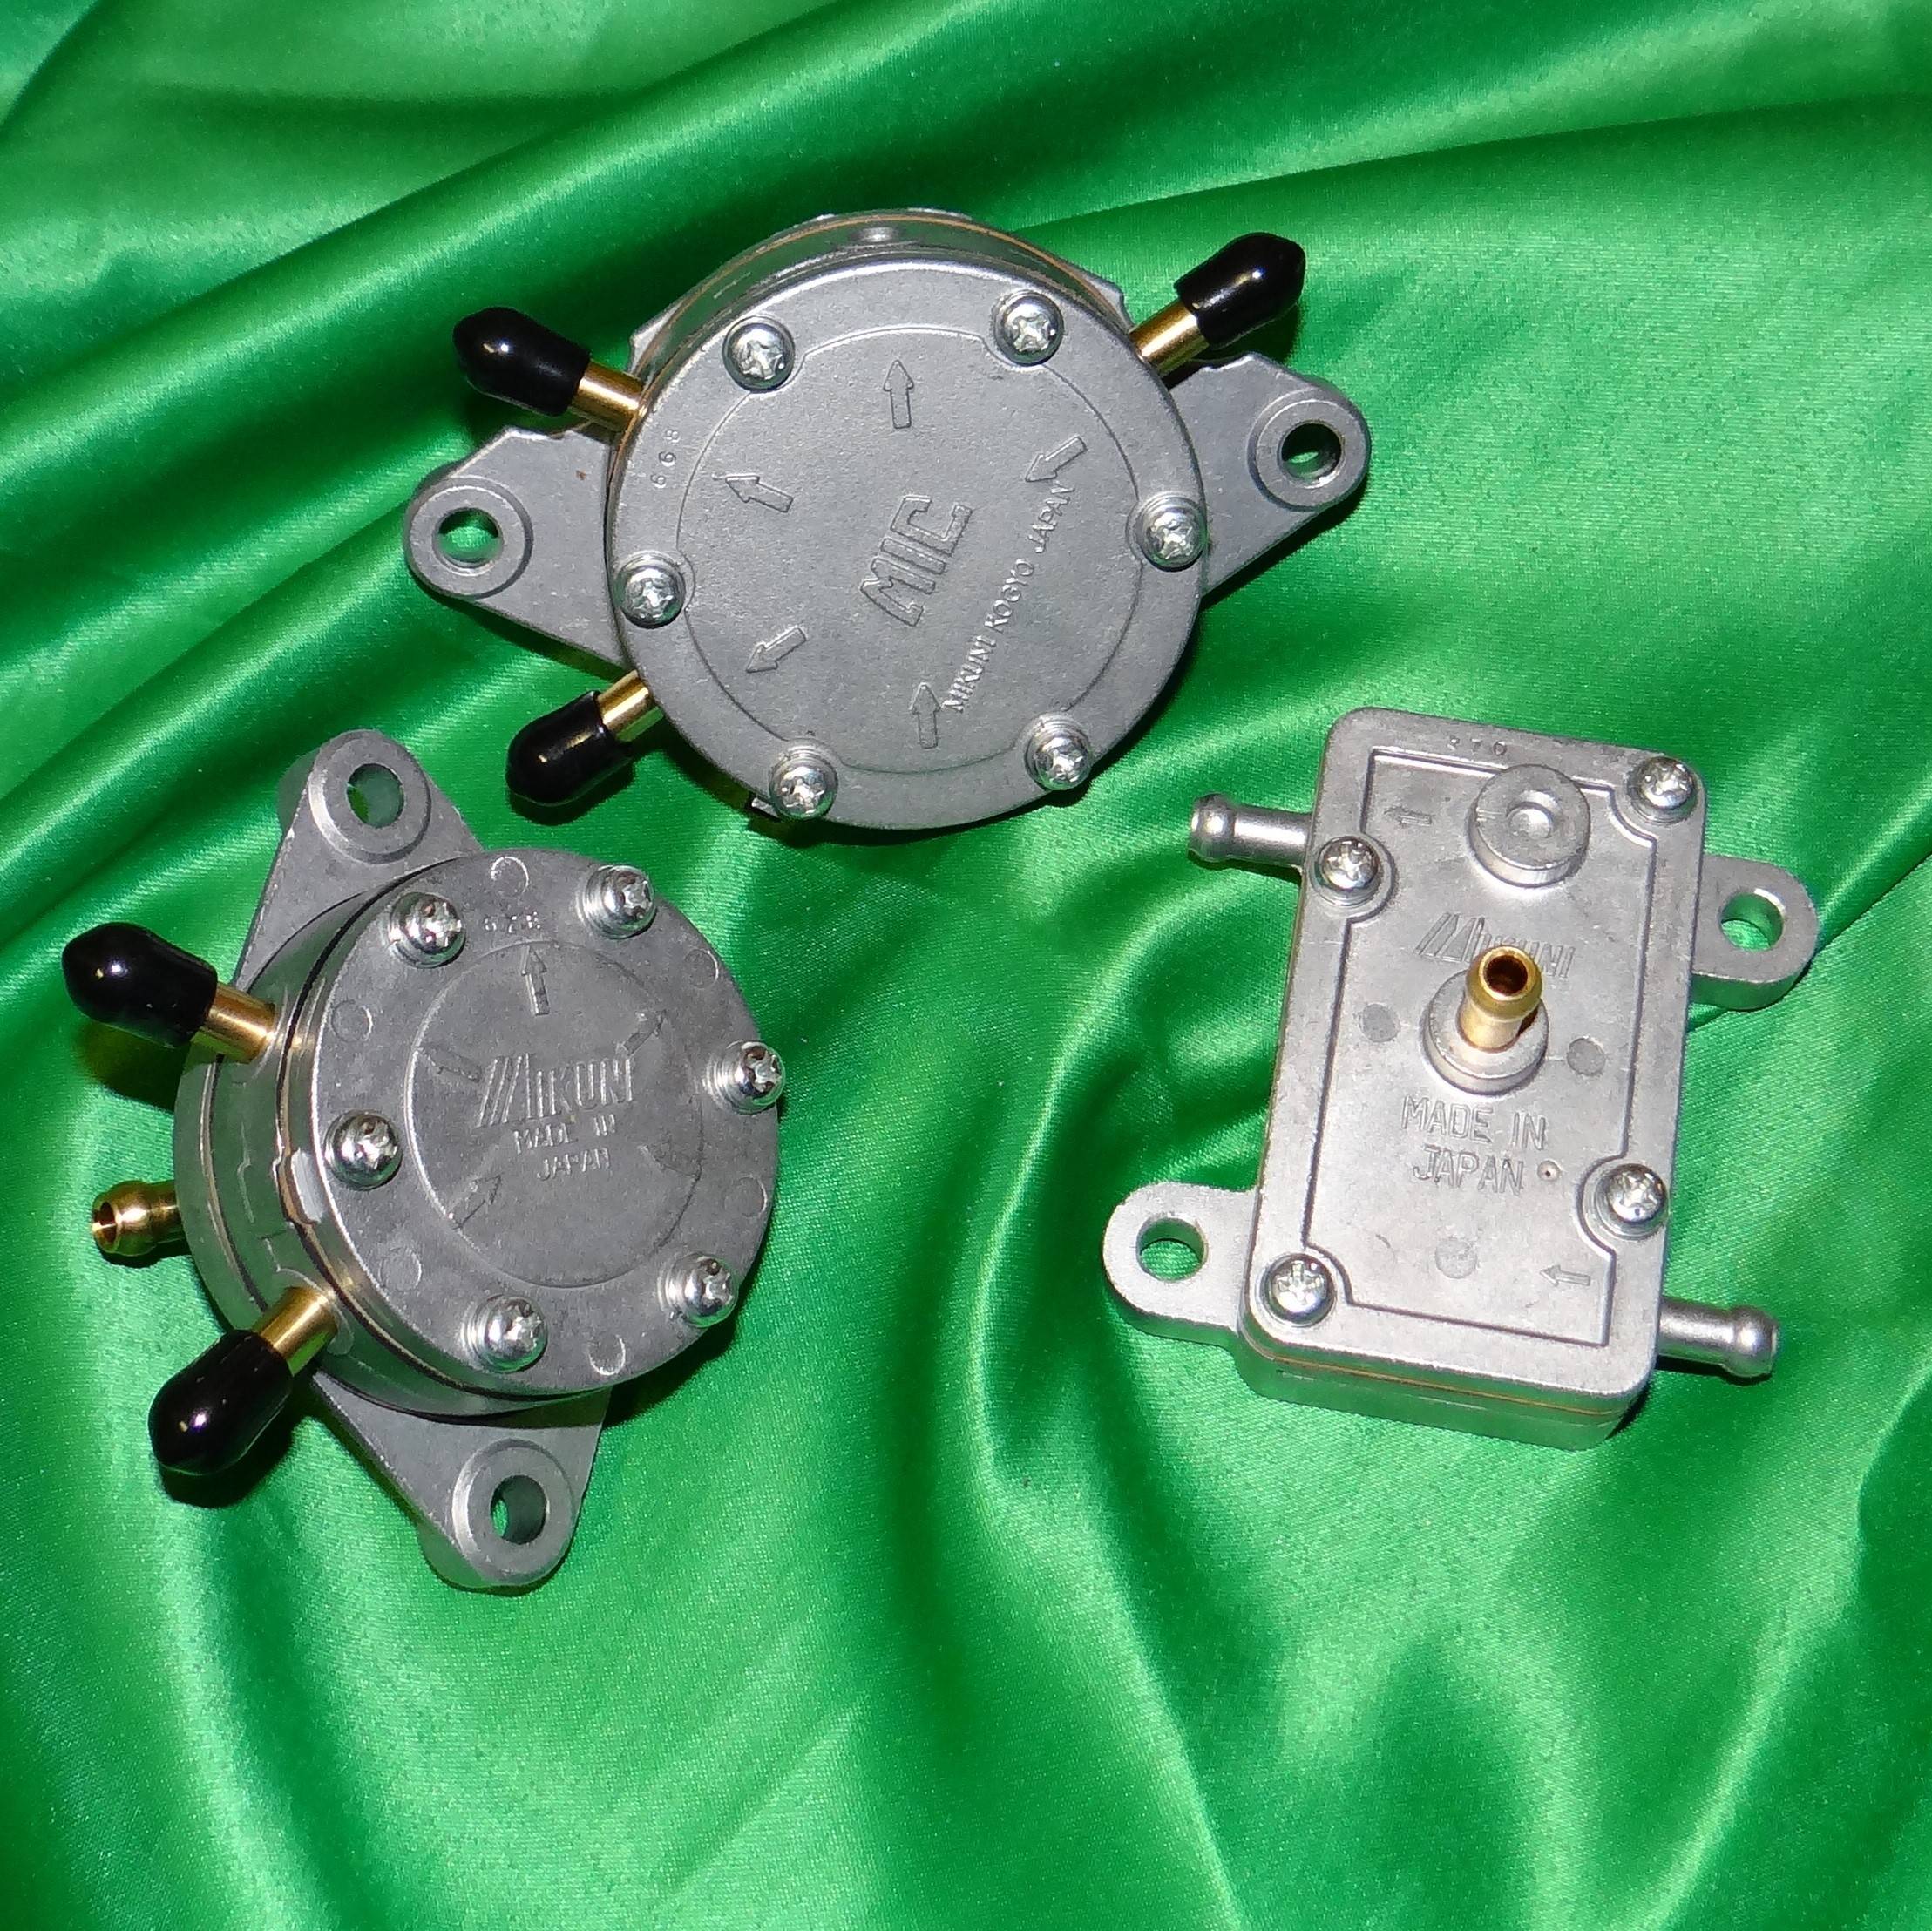 Fuel tap and pump for HUSABERG 4-stroke engines